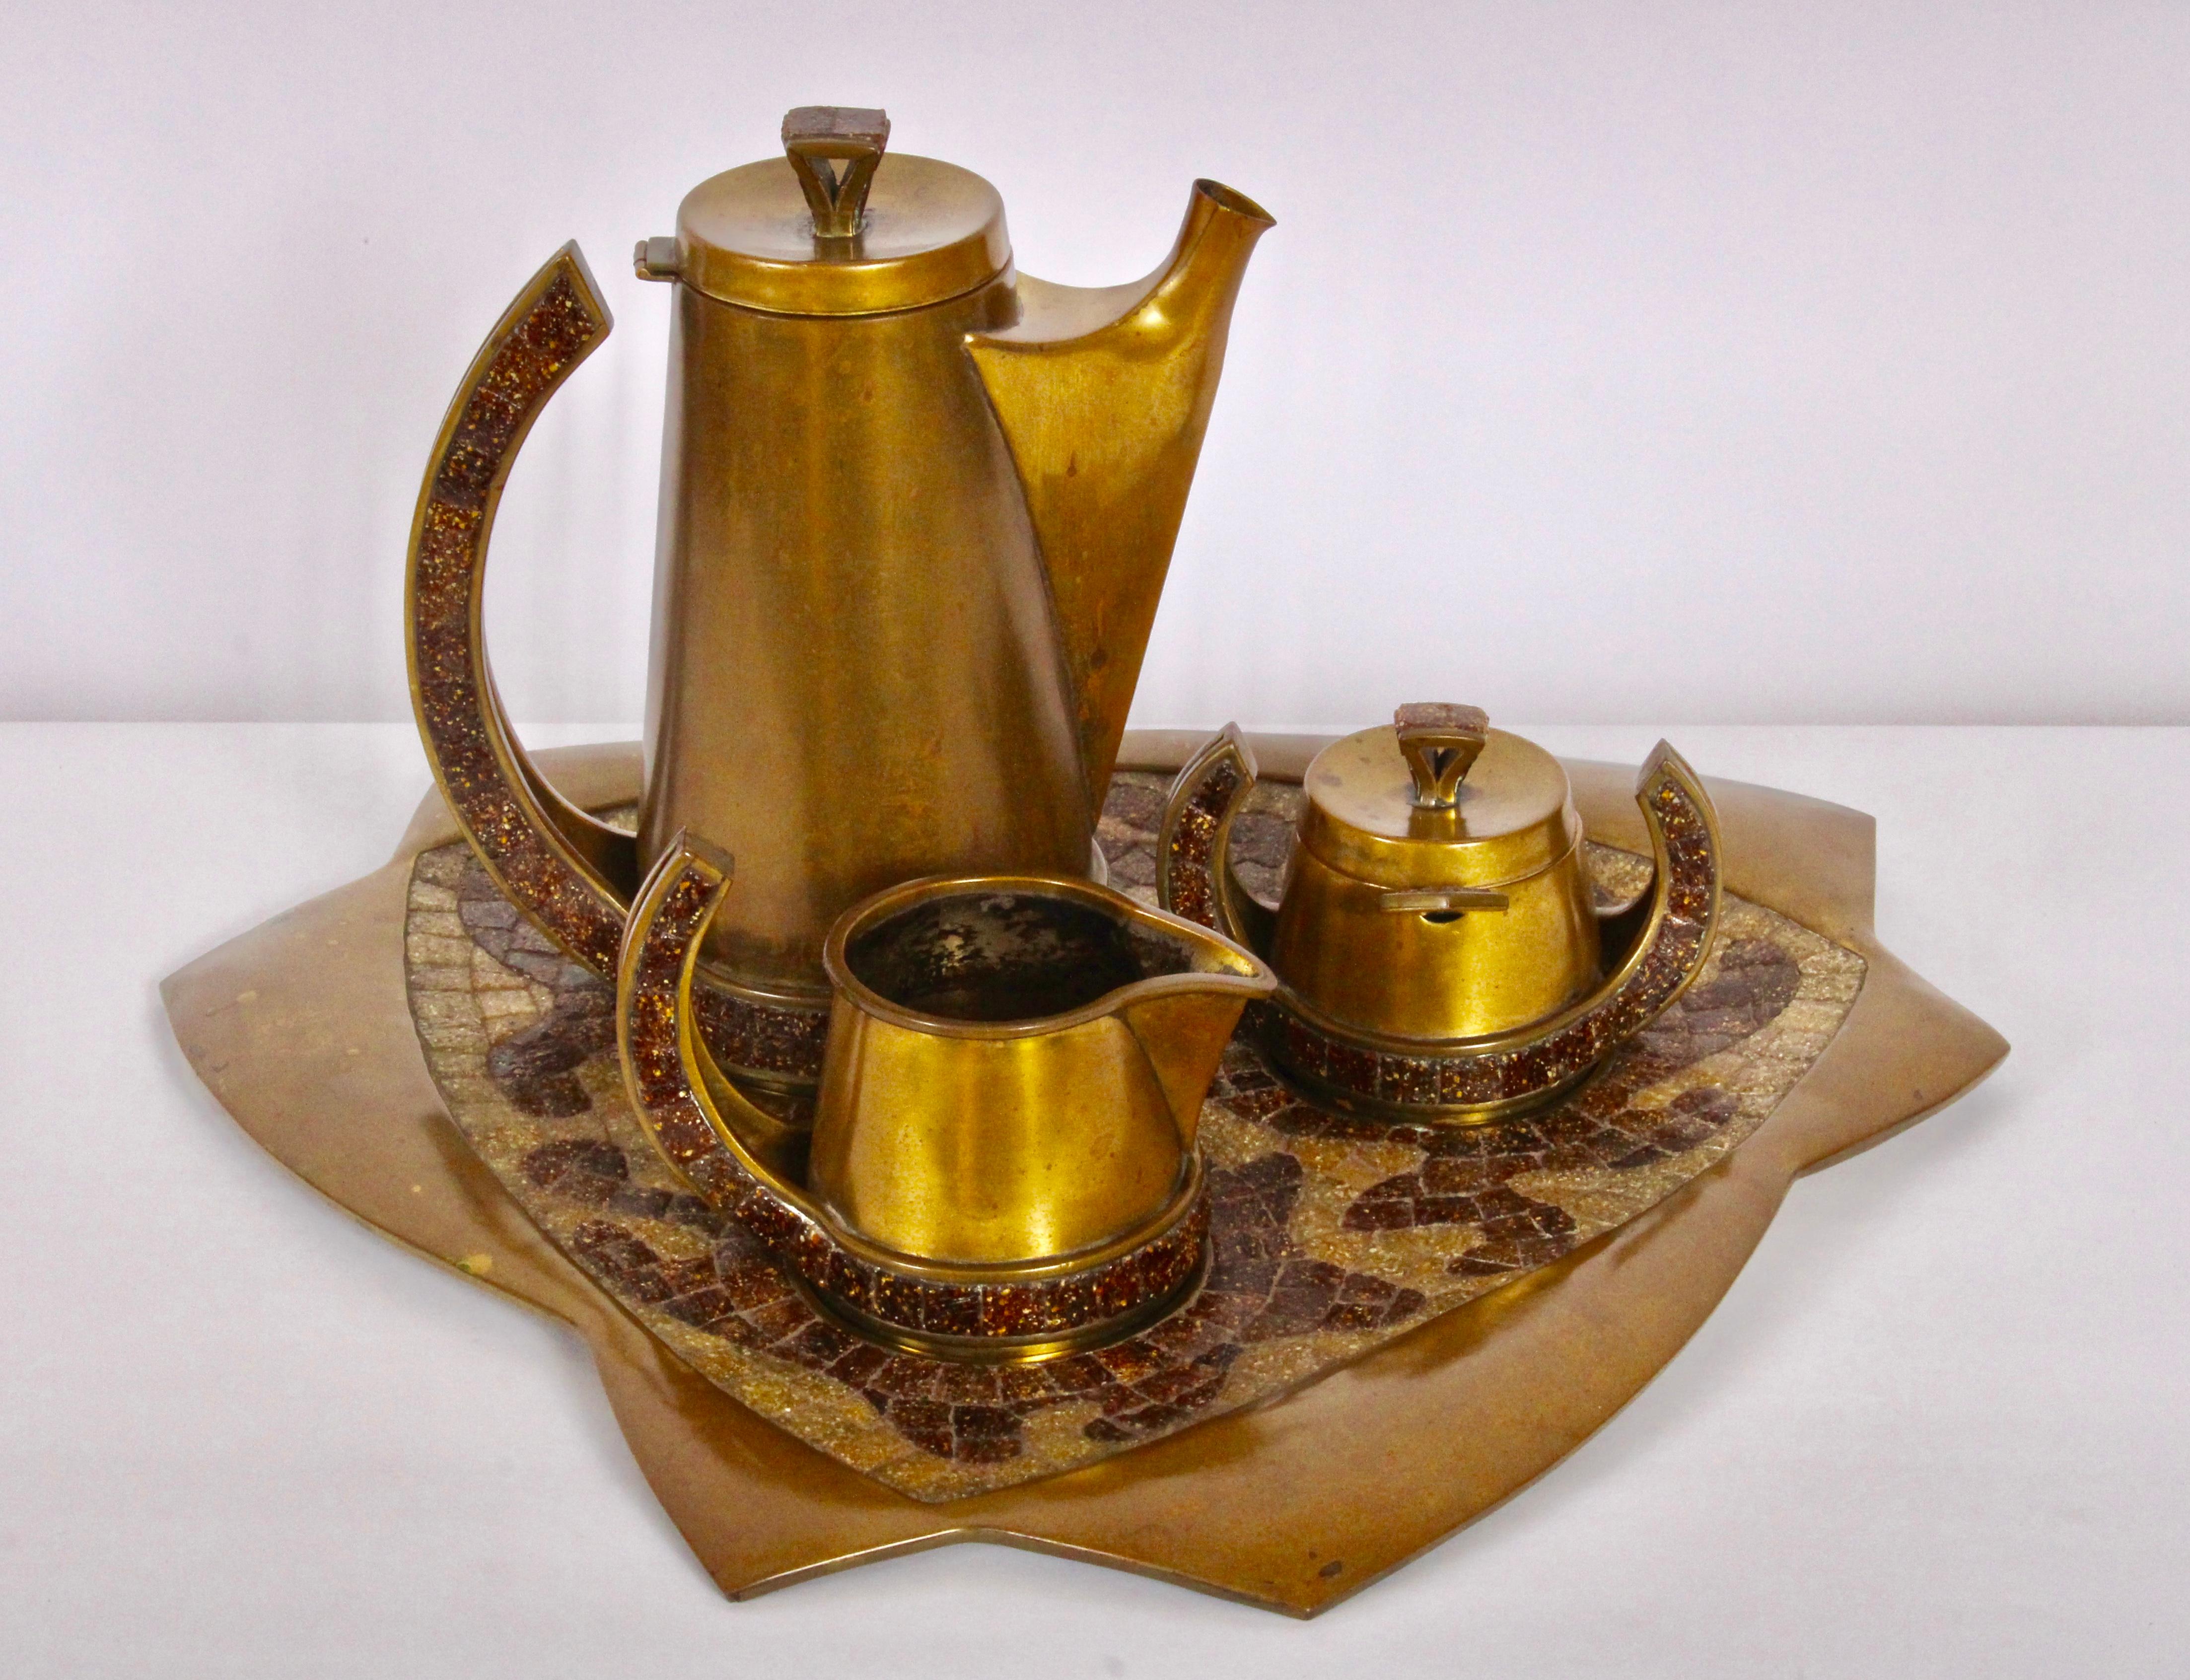 Mid-Century Mexican Modern solid brass and glass tile Mosaic coffee service by Salvador Teran. Reflective Copper toned 7-piece set. Featuring tile embellished Brass tea pot / coffee server, lid, sugar bowl with spoon and lid, creamer and serving